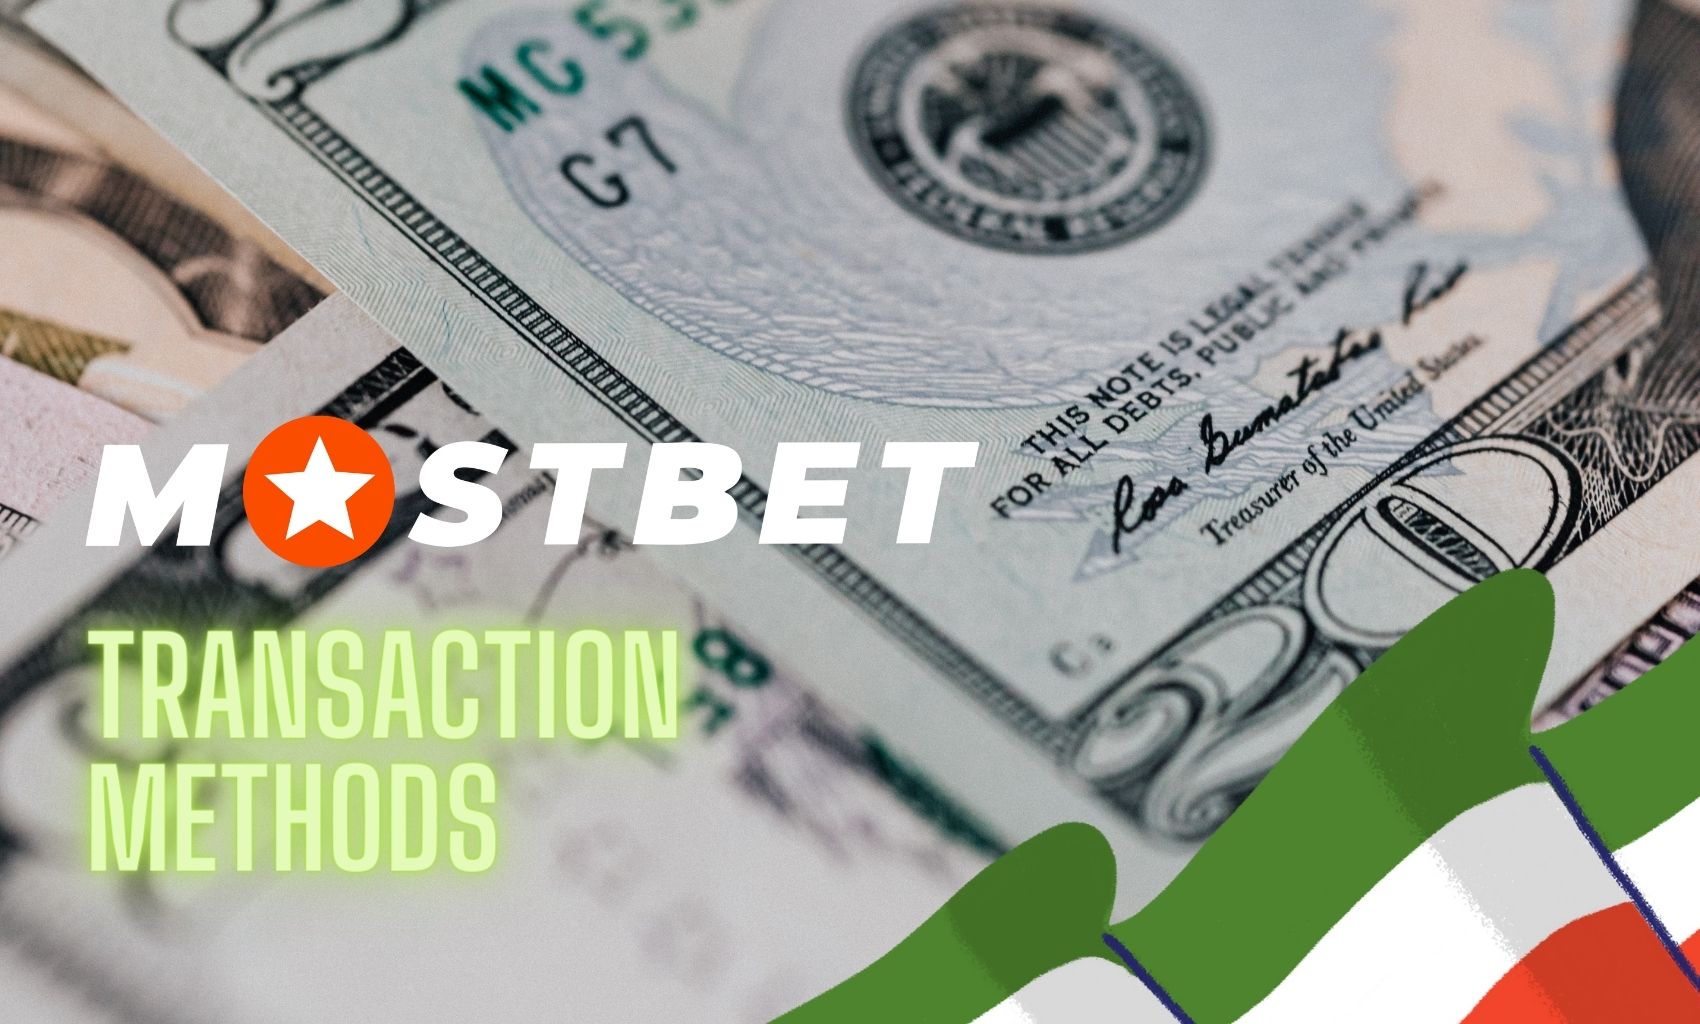 Mostbet India transaction methods overview